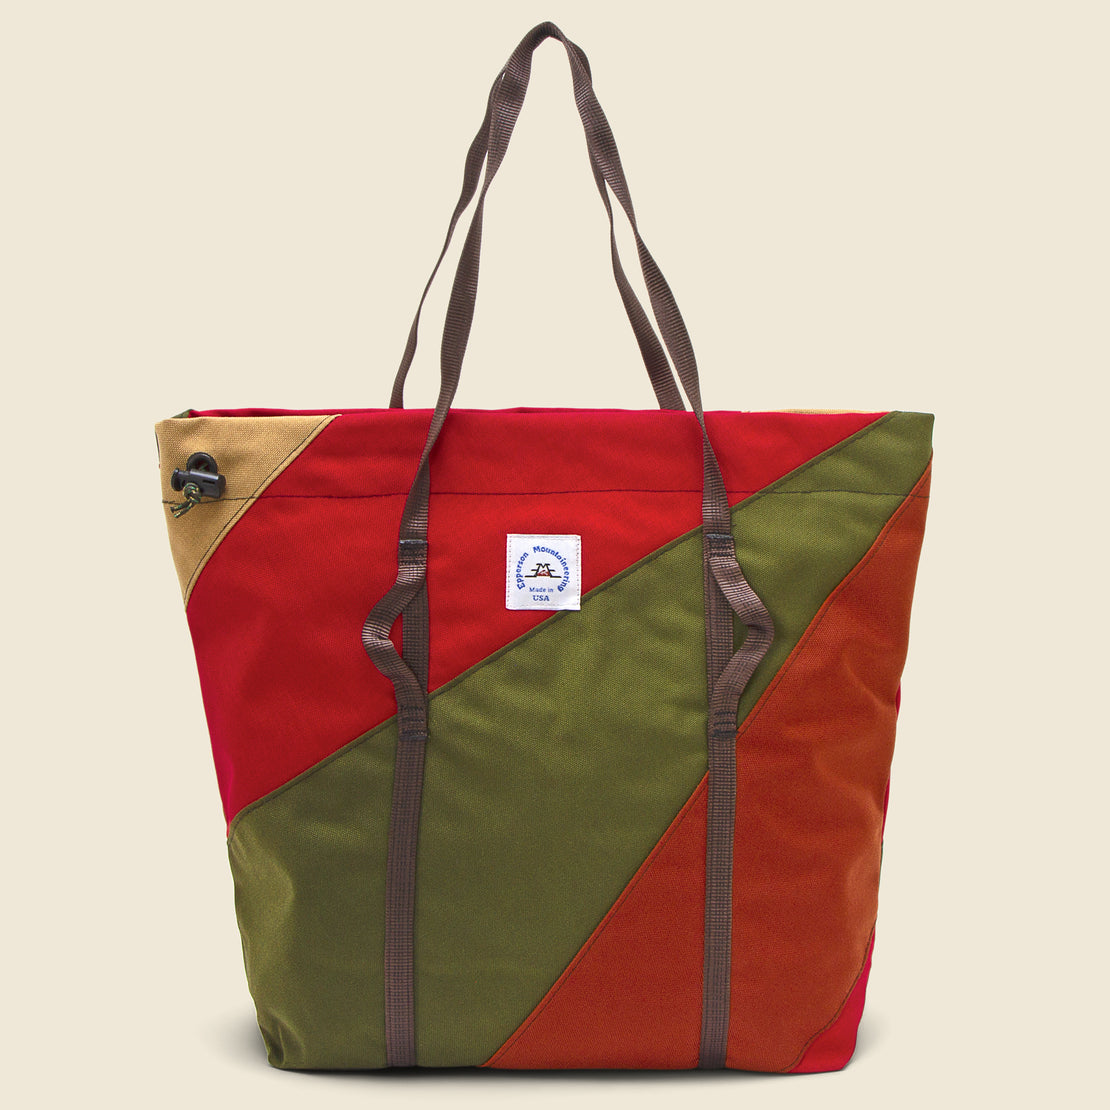 Leisure Tote - Crazy 2 - Epperson Mountaineering - STAG Provisions - Accessories - Bags / Luggage